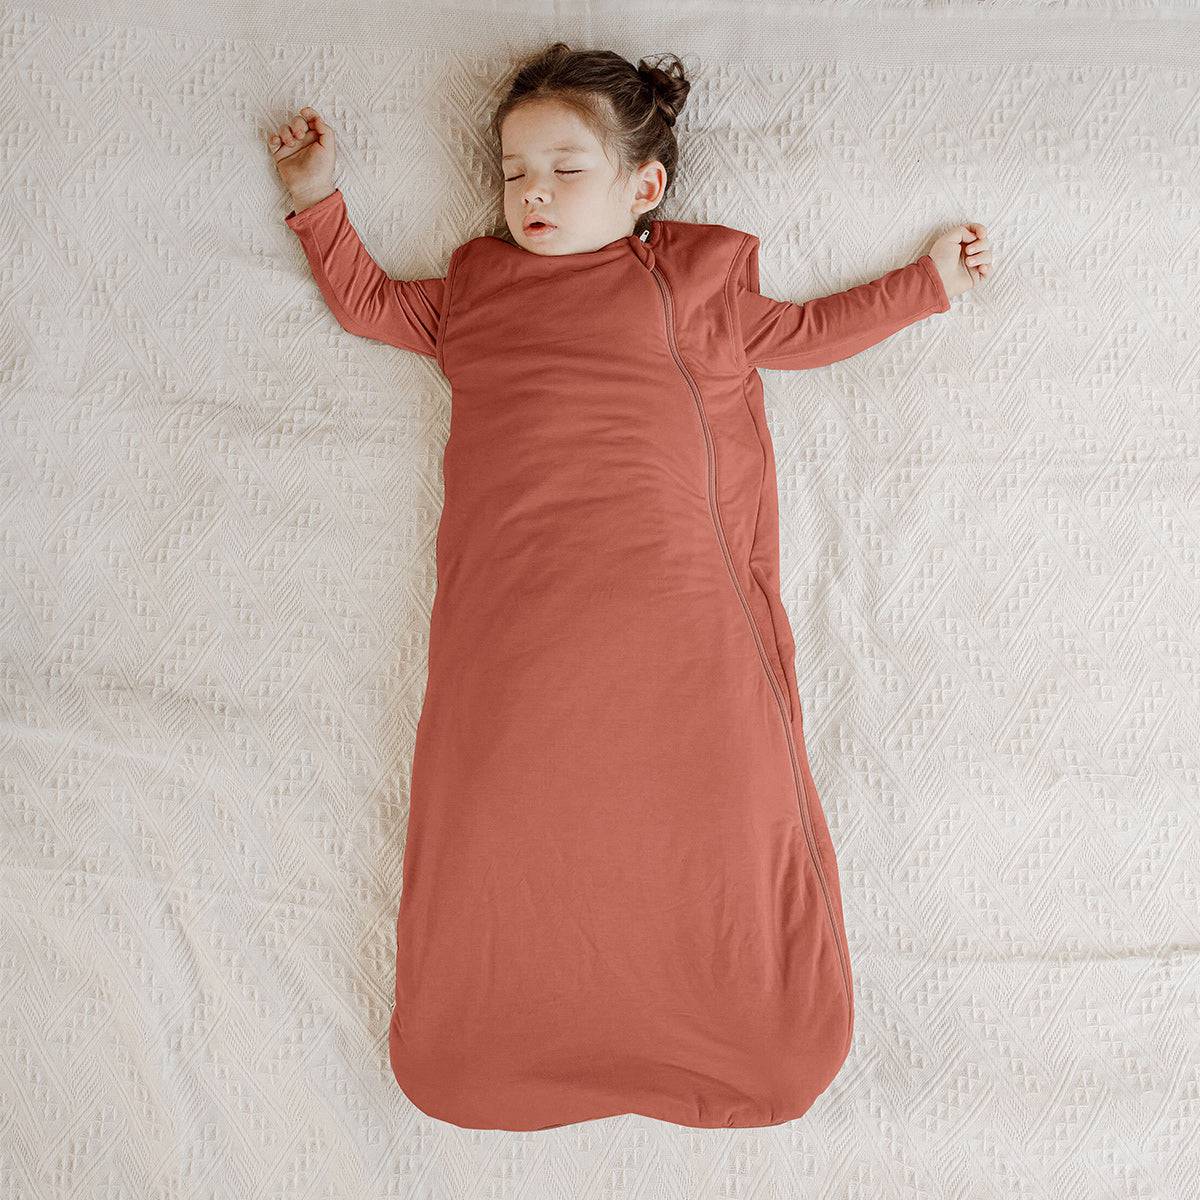 Baby Bamboo Quilted Sleeveless Sleep Sack TOG 1.0 - Red Brown